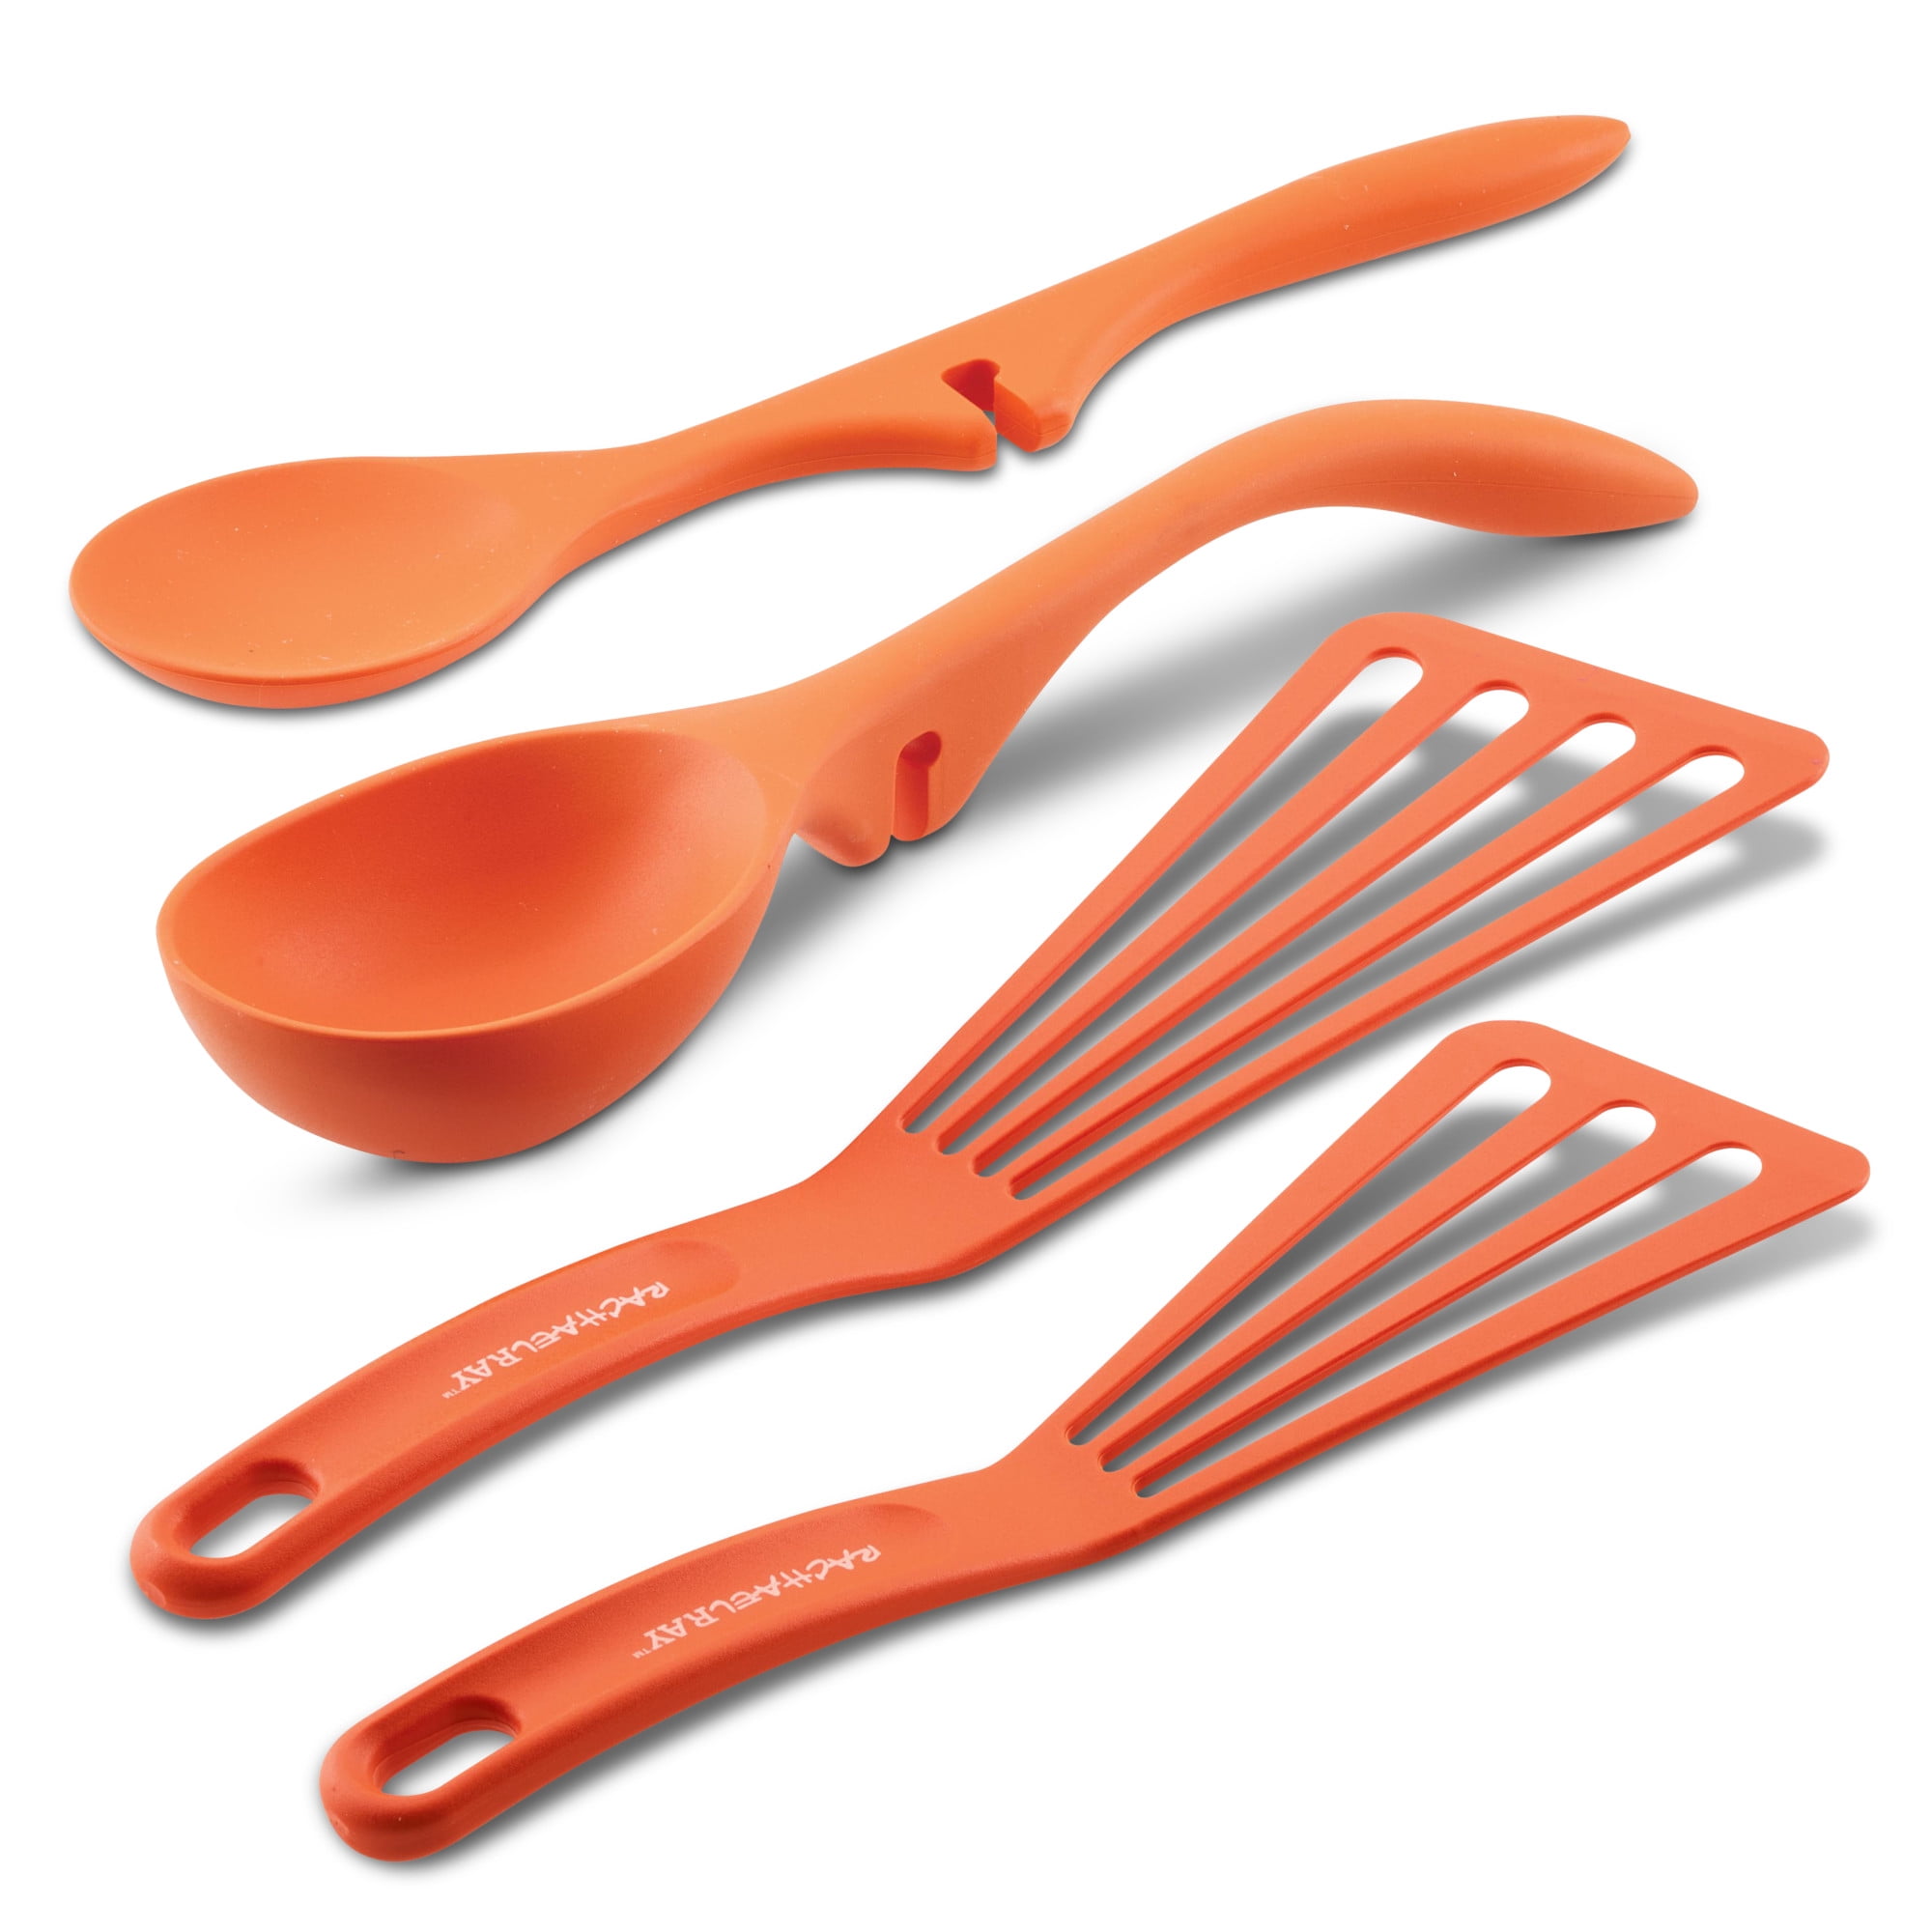 Rachael Ray Silicone Lazy Spoon and Ladle Set of 2 55770 - The Home Depot